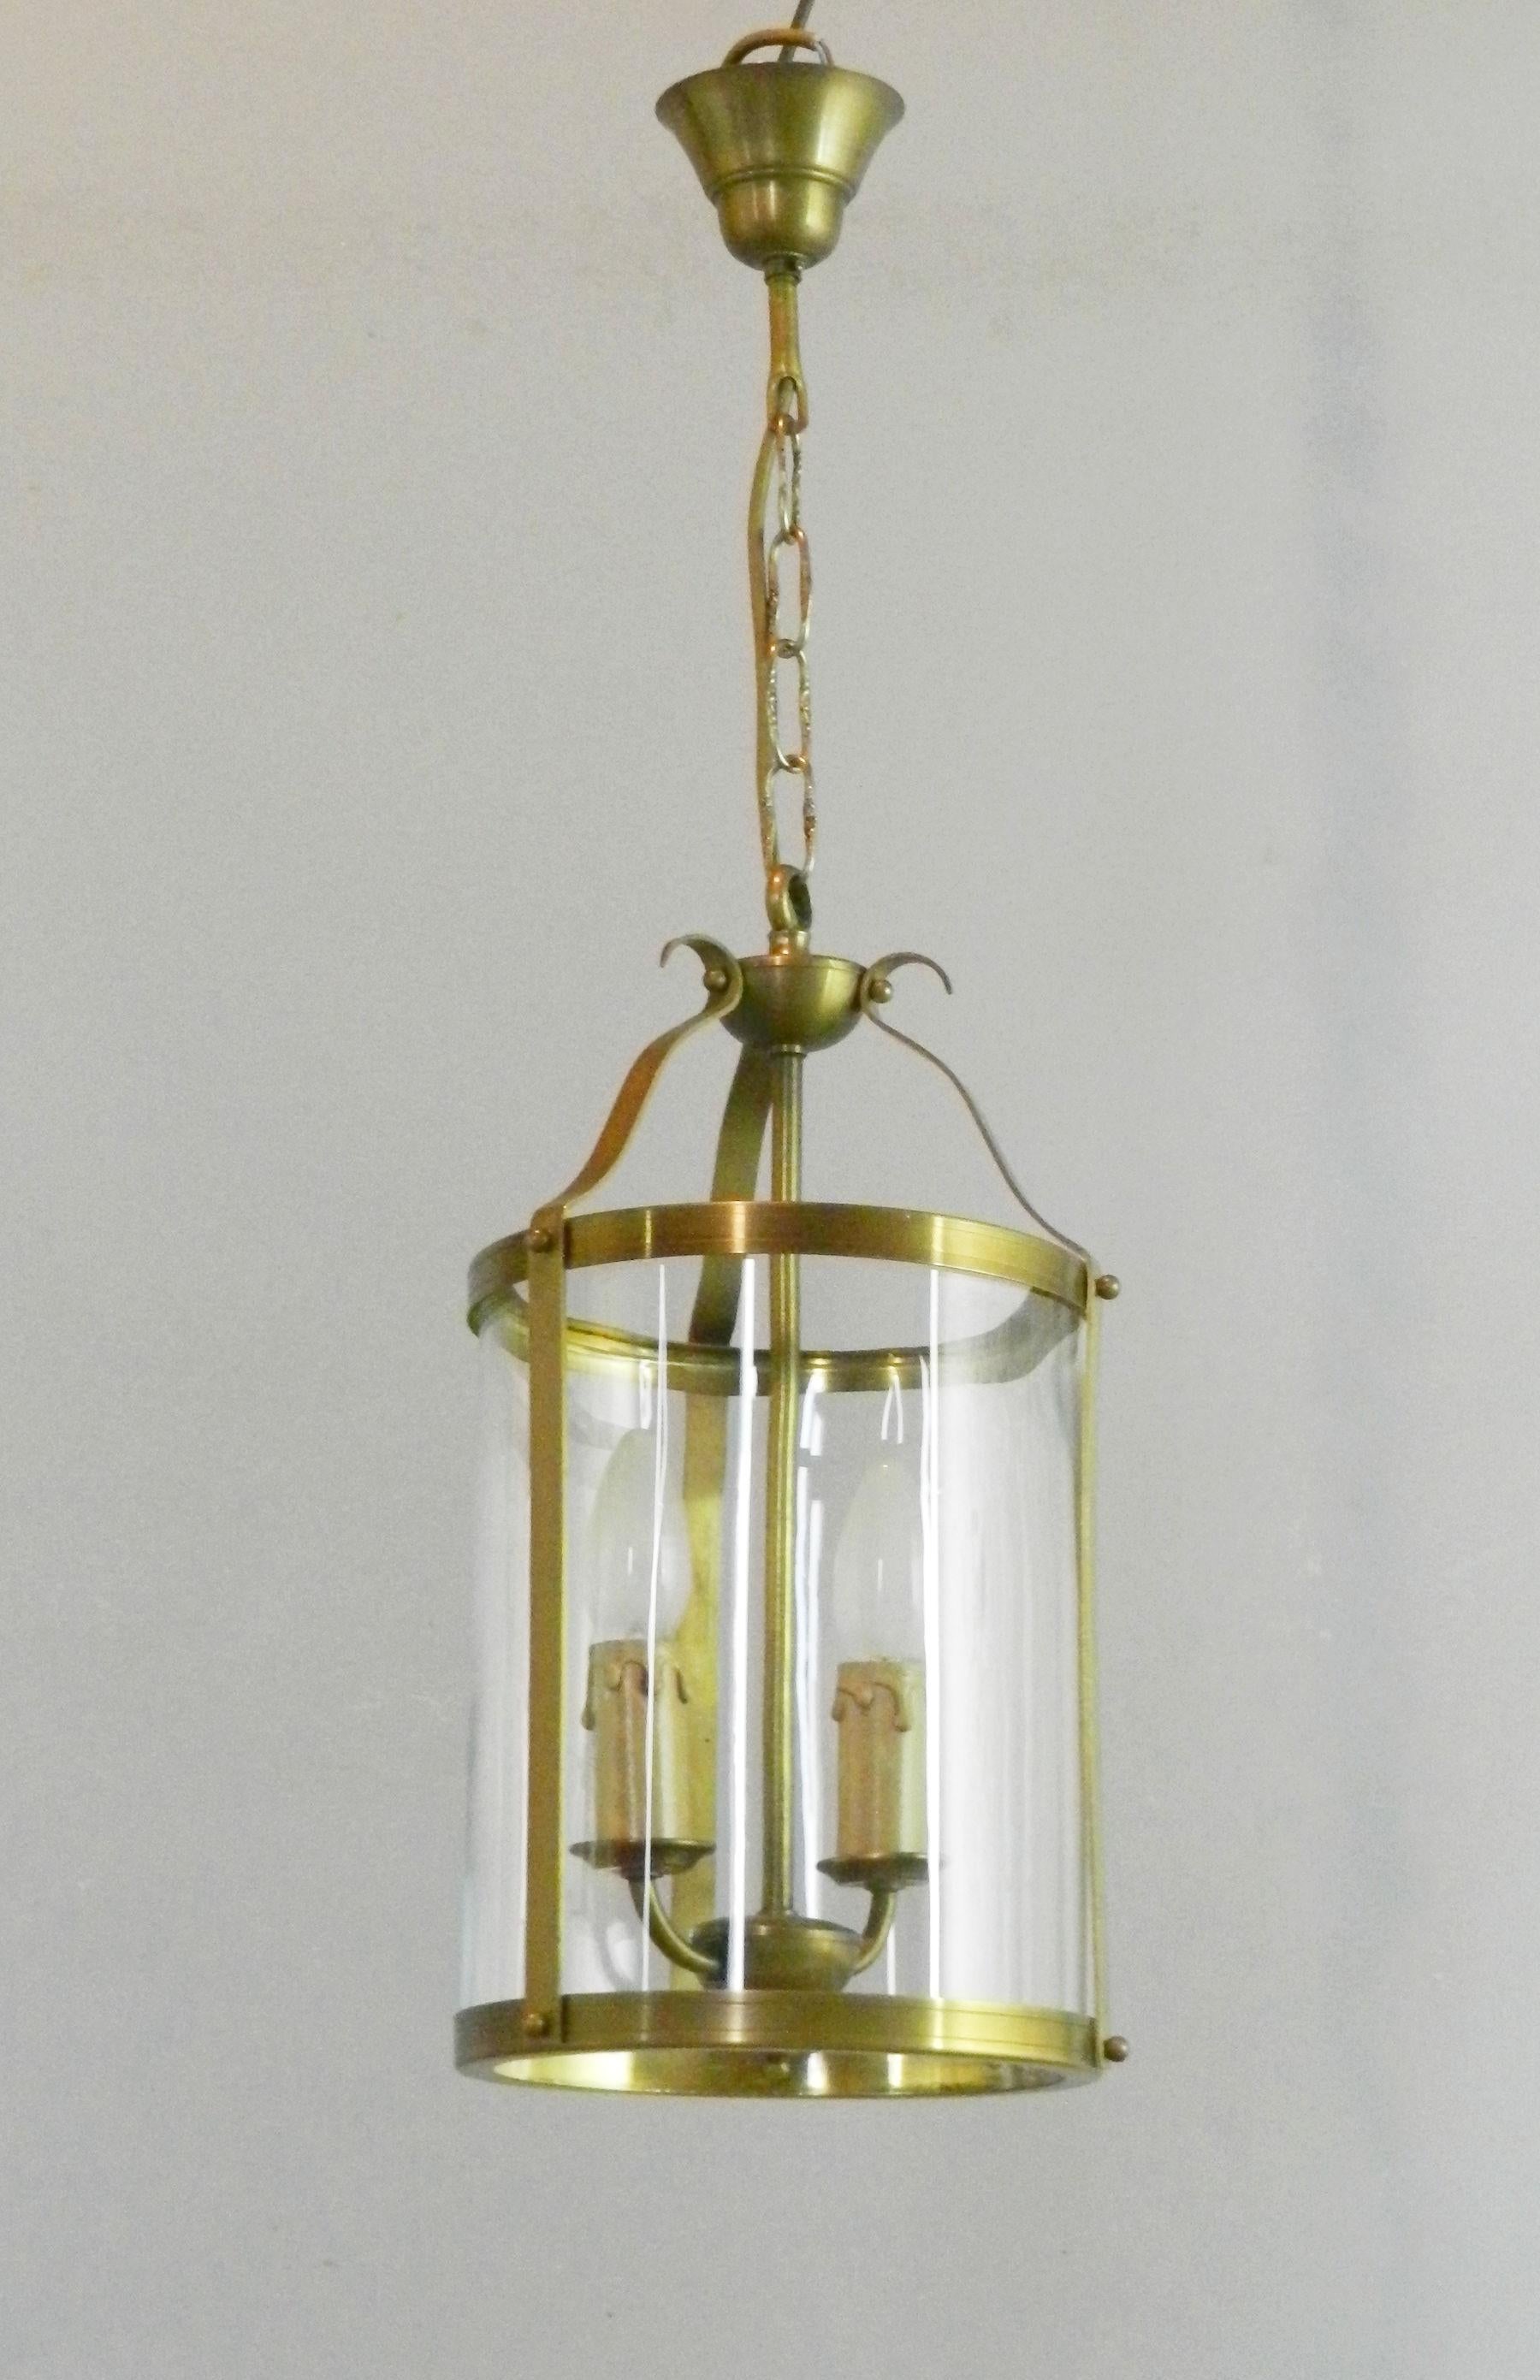 An attractive French brass lantern suspended from its original chain and ceiling fixture, leading down to central twin candle lights.

This is surrounded by a single convex clear glass shade.

The lantern is in full working order and as with all